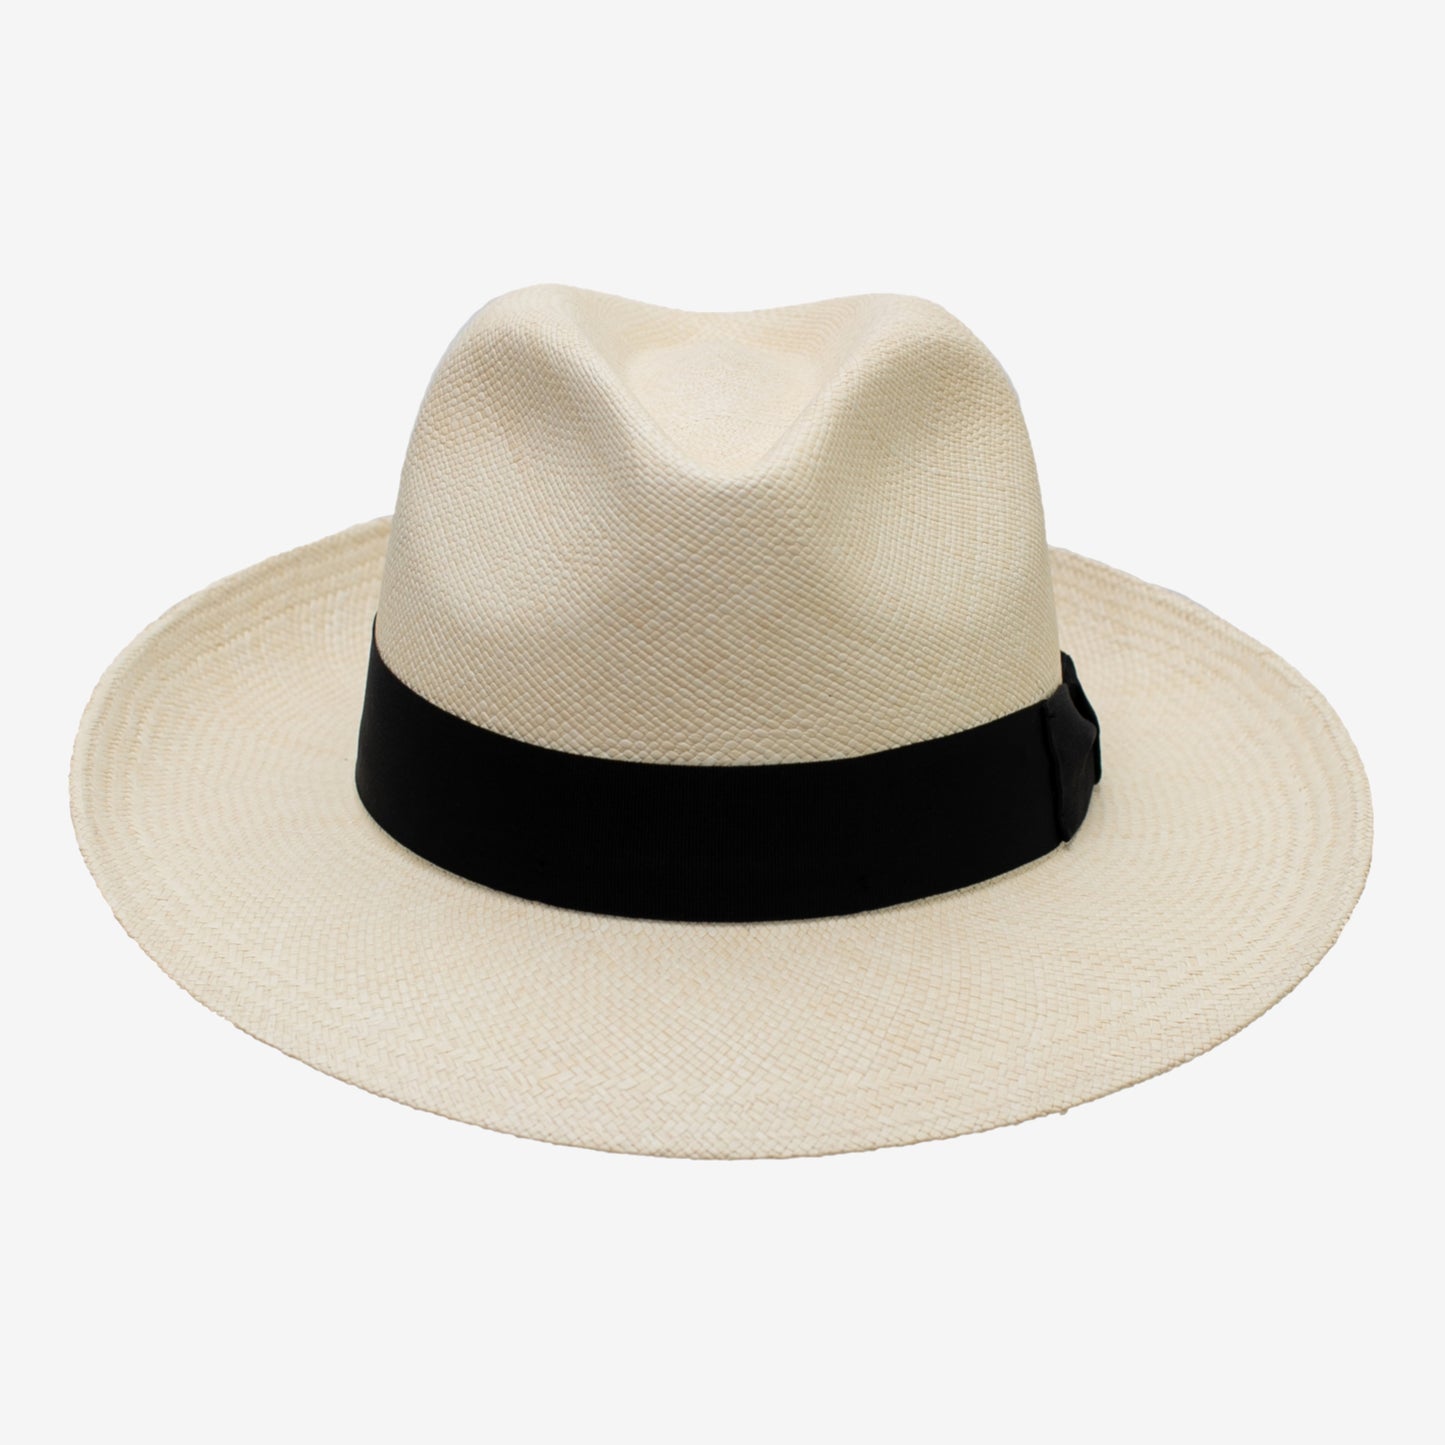 mindo-hats-the-don-galo-classic-straw-panama-hat-natural-front